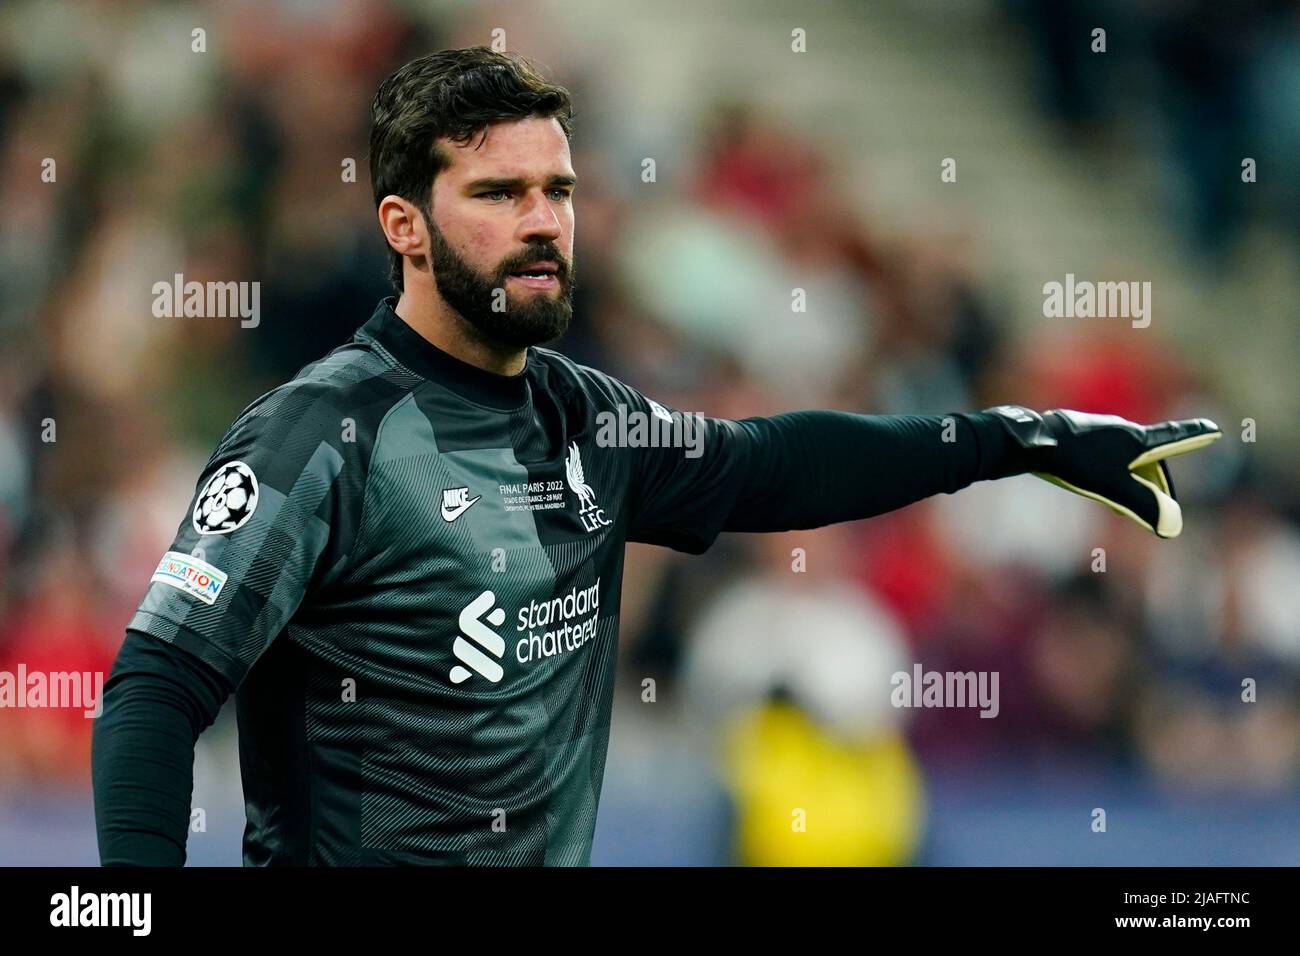 Alisson Becker of Liverpool FC during the UEFA Champions League Final match between Liverpool FC and Real Madrid played at Stade de France on May 28, 2022 in Paris, France. (Photo / Magma) Stock Photo